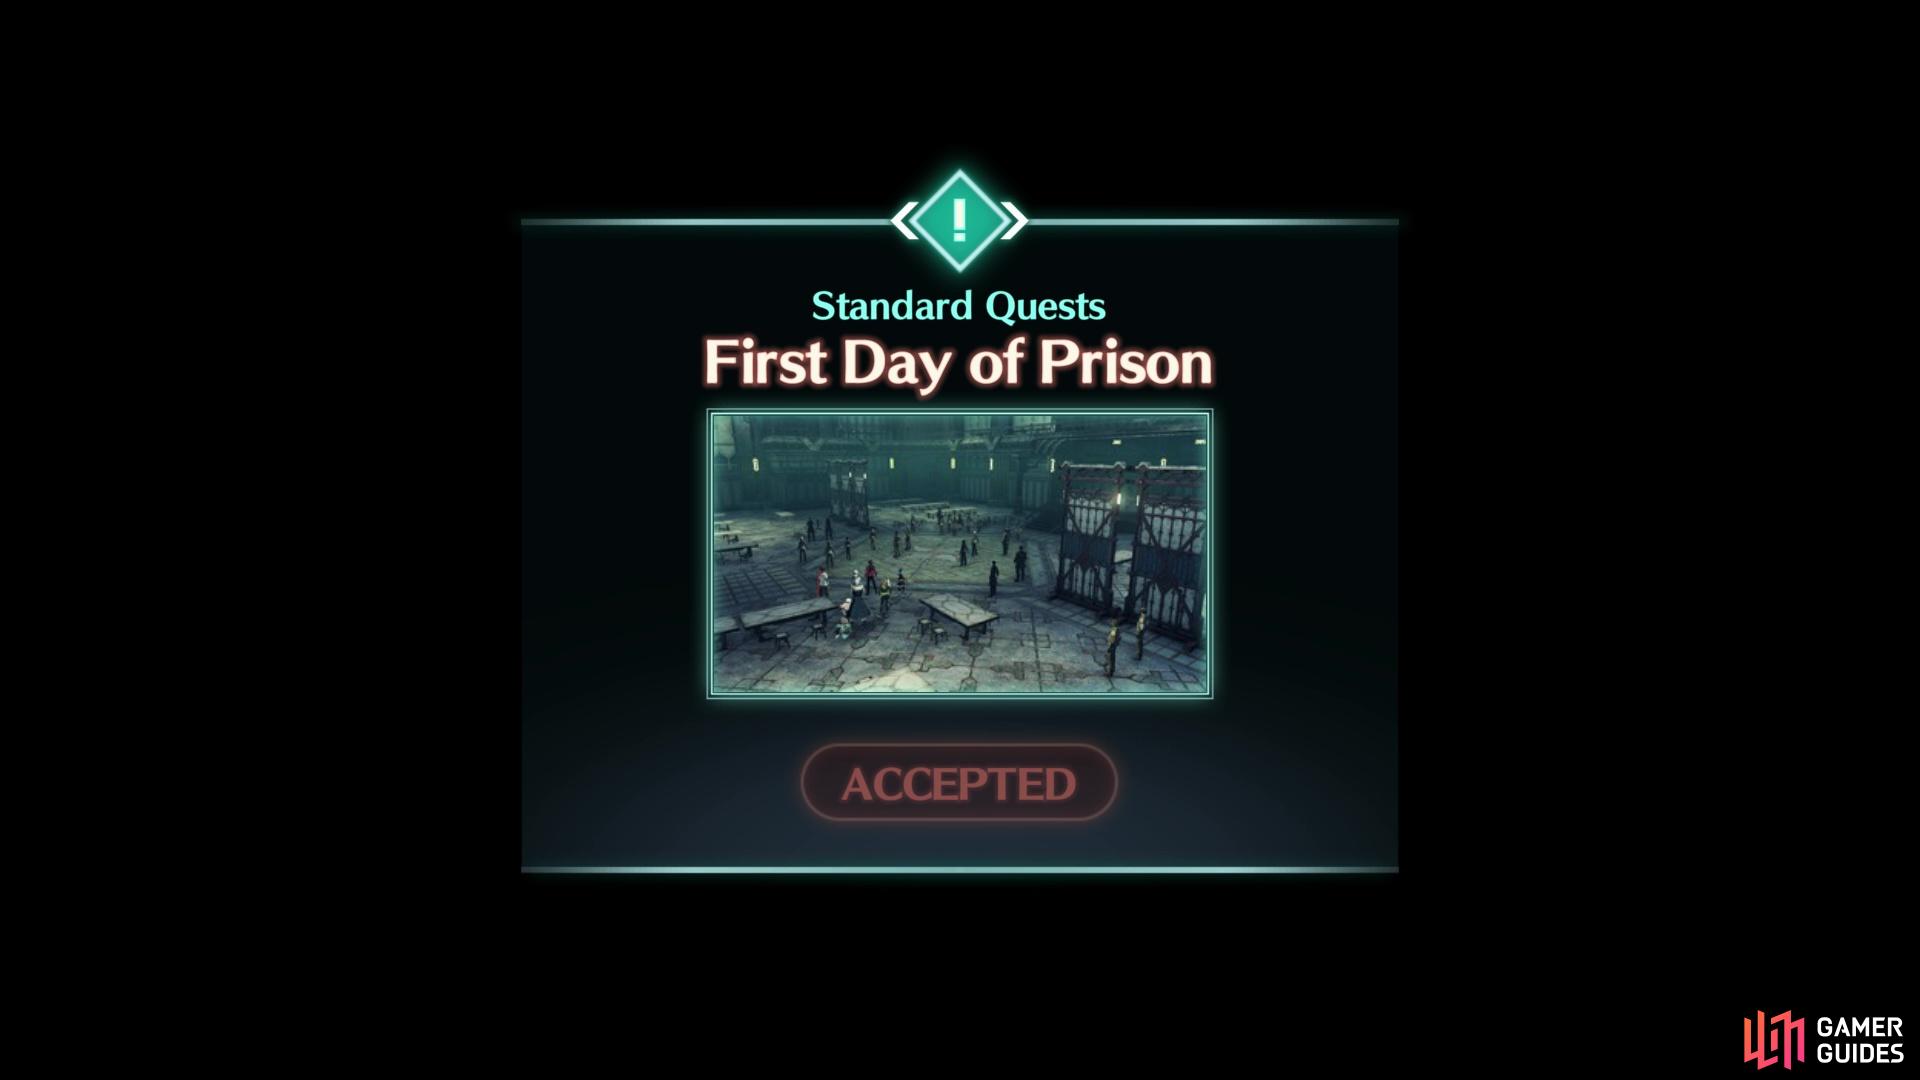 First Day of Prison Standard Quest.